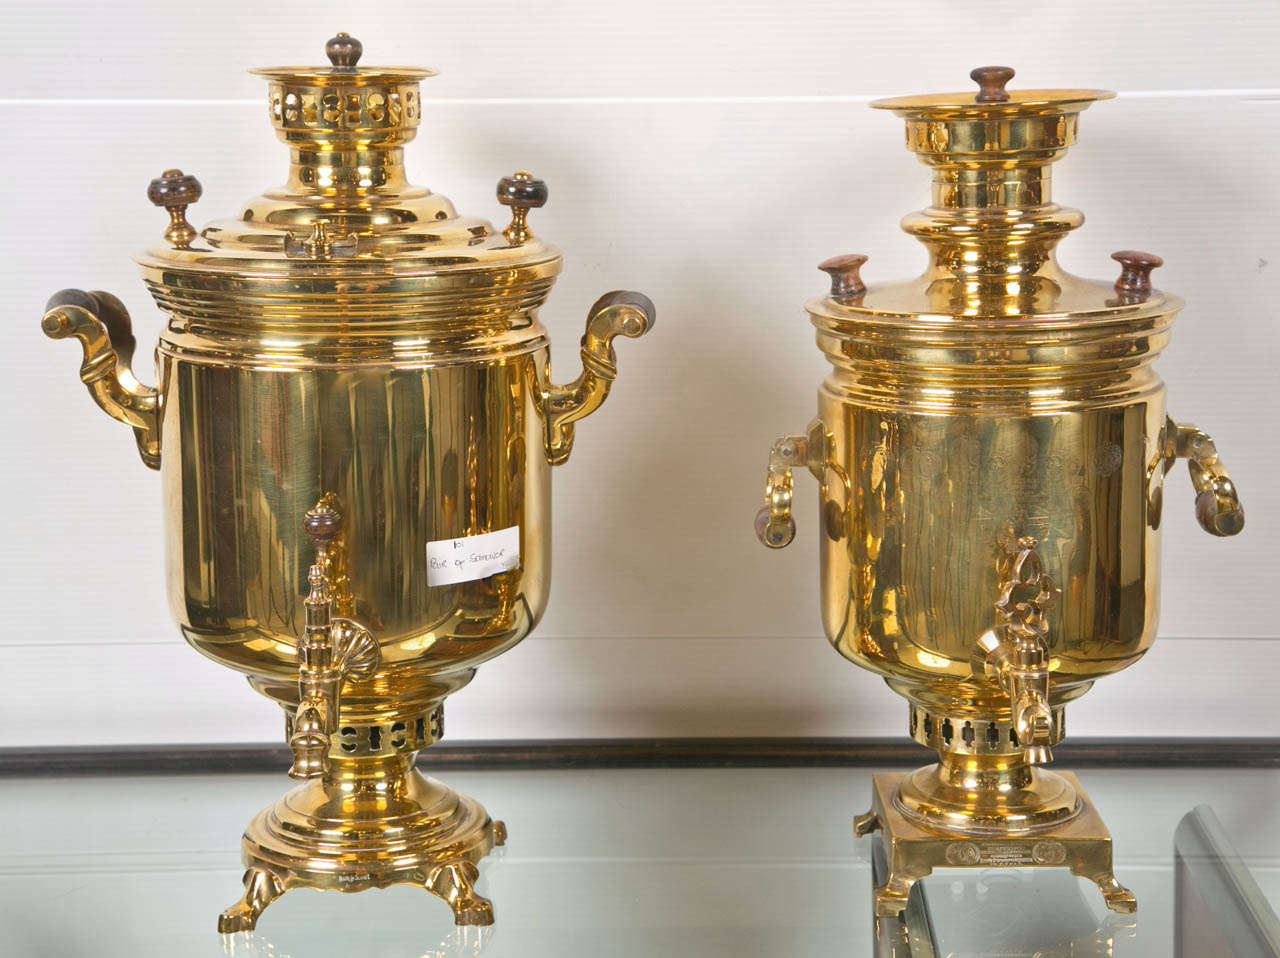 A fine compatible pair of brass Russian samovar's,  never used. Each having wooden handles and of a heavy brass structure.  Both signed, dated and hallmark stamped in Russian. Both stamped Made in Soviet Union.  This fine pair of quality samovar's